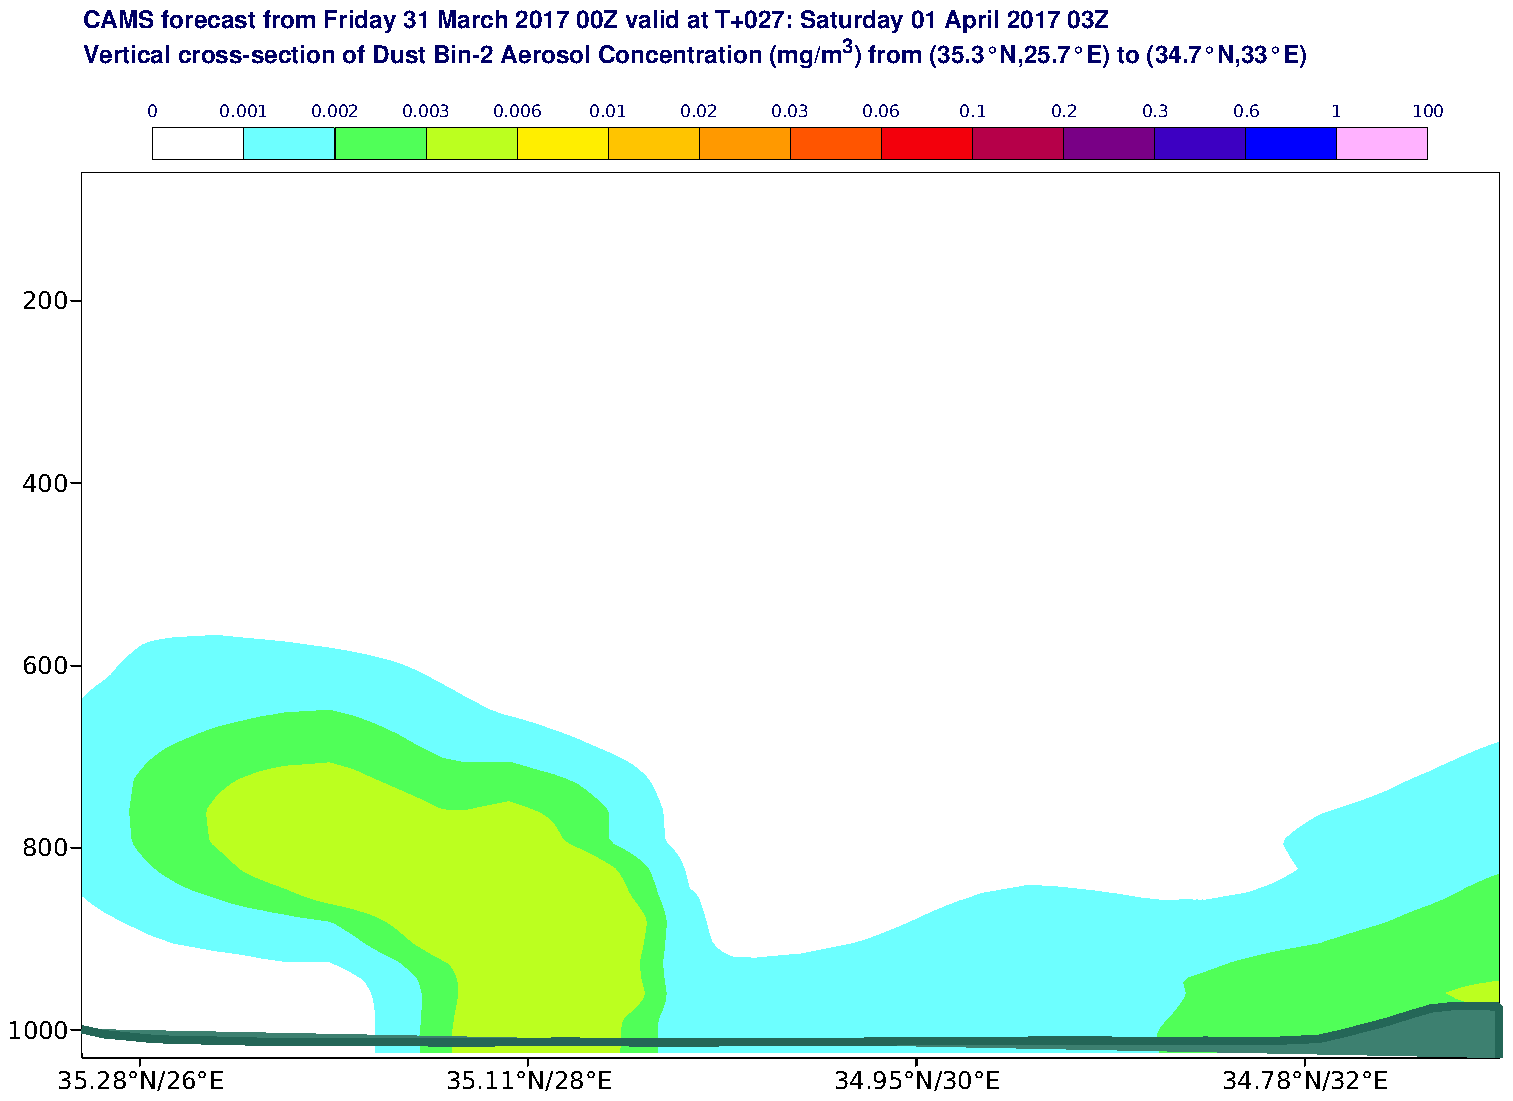 Vertical cross-section of Dust Bin-2 Aerosol Concentration (mg/m3) valid at T27 - 2017-04-01 03:00